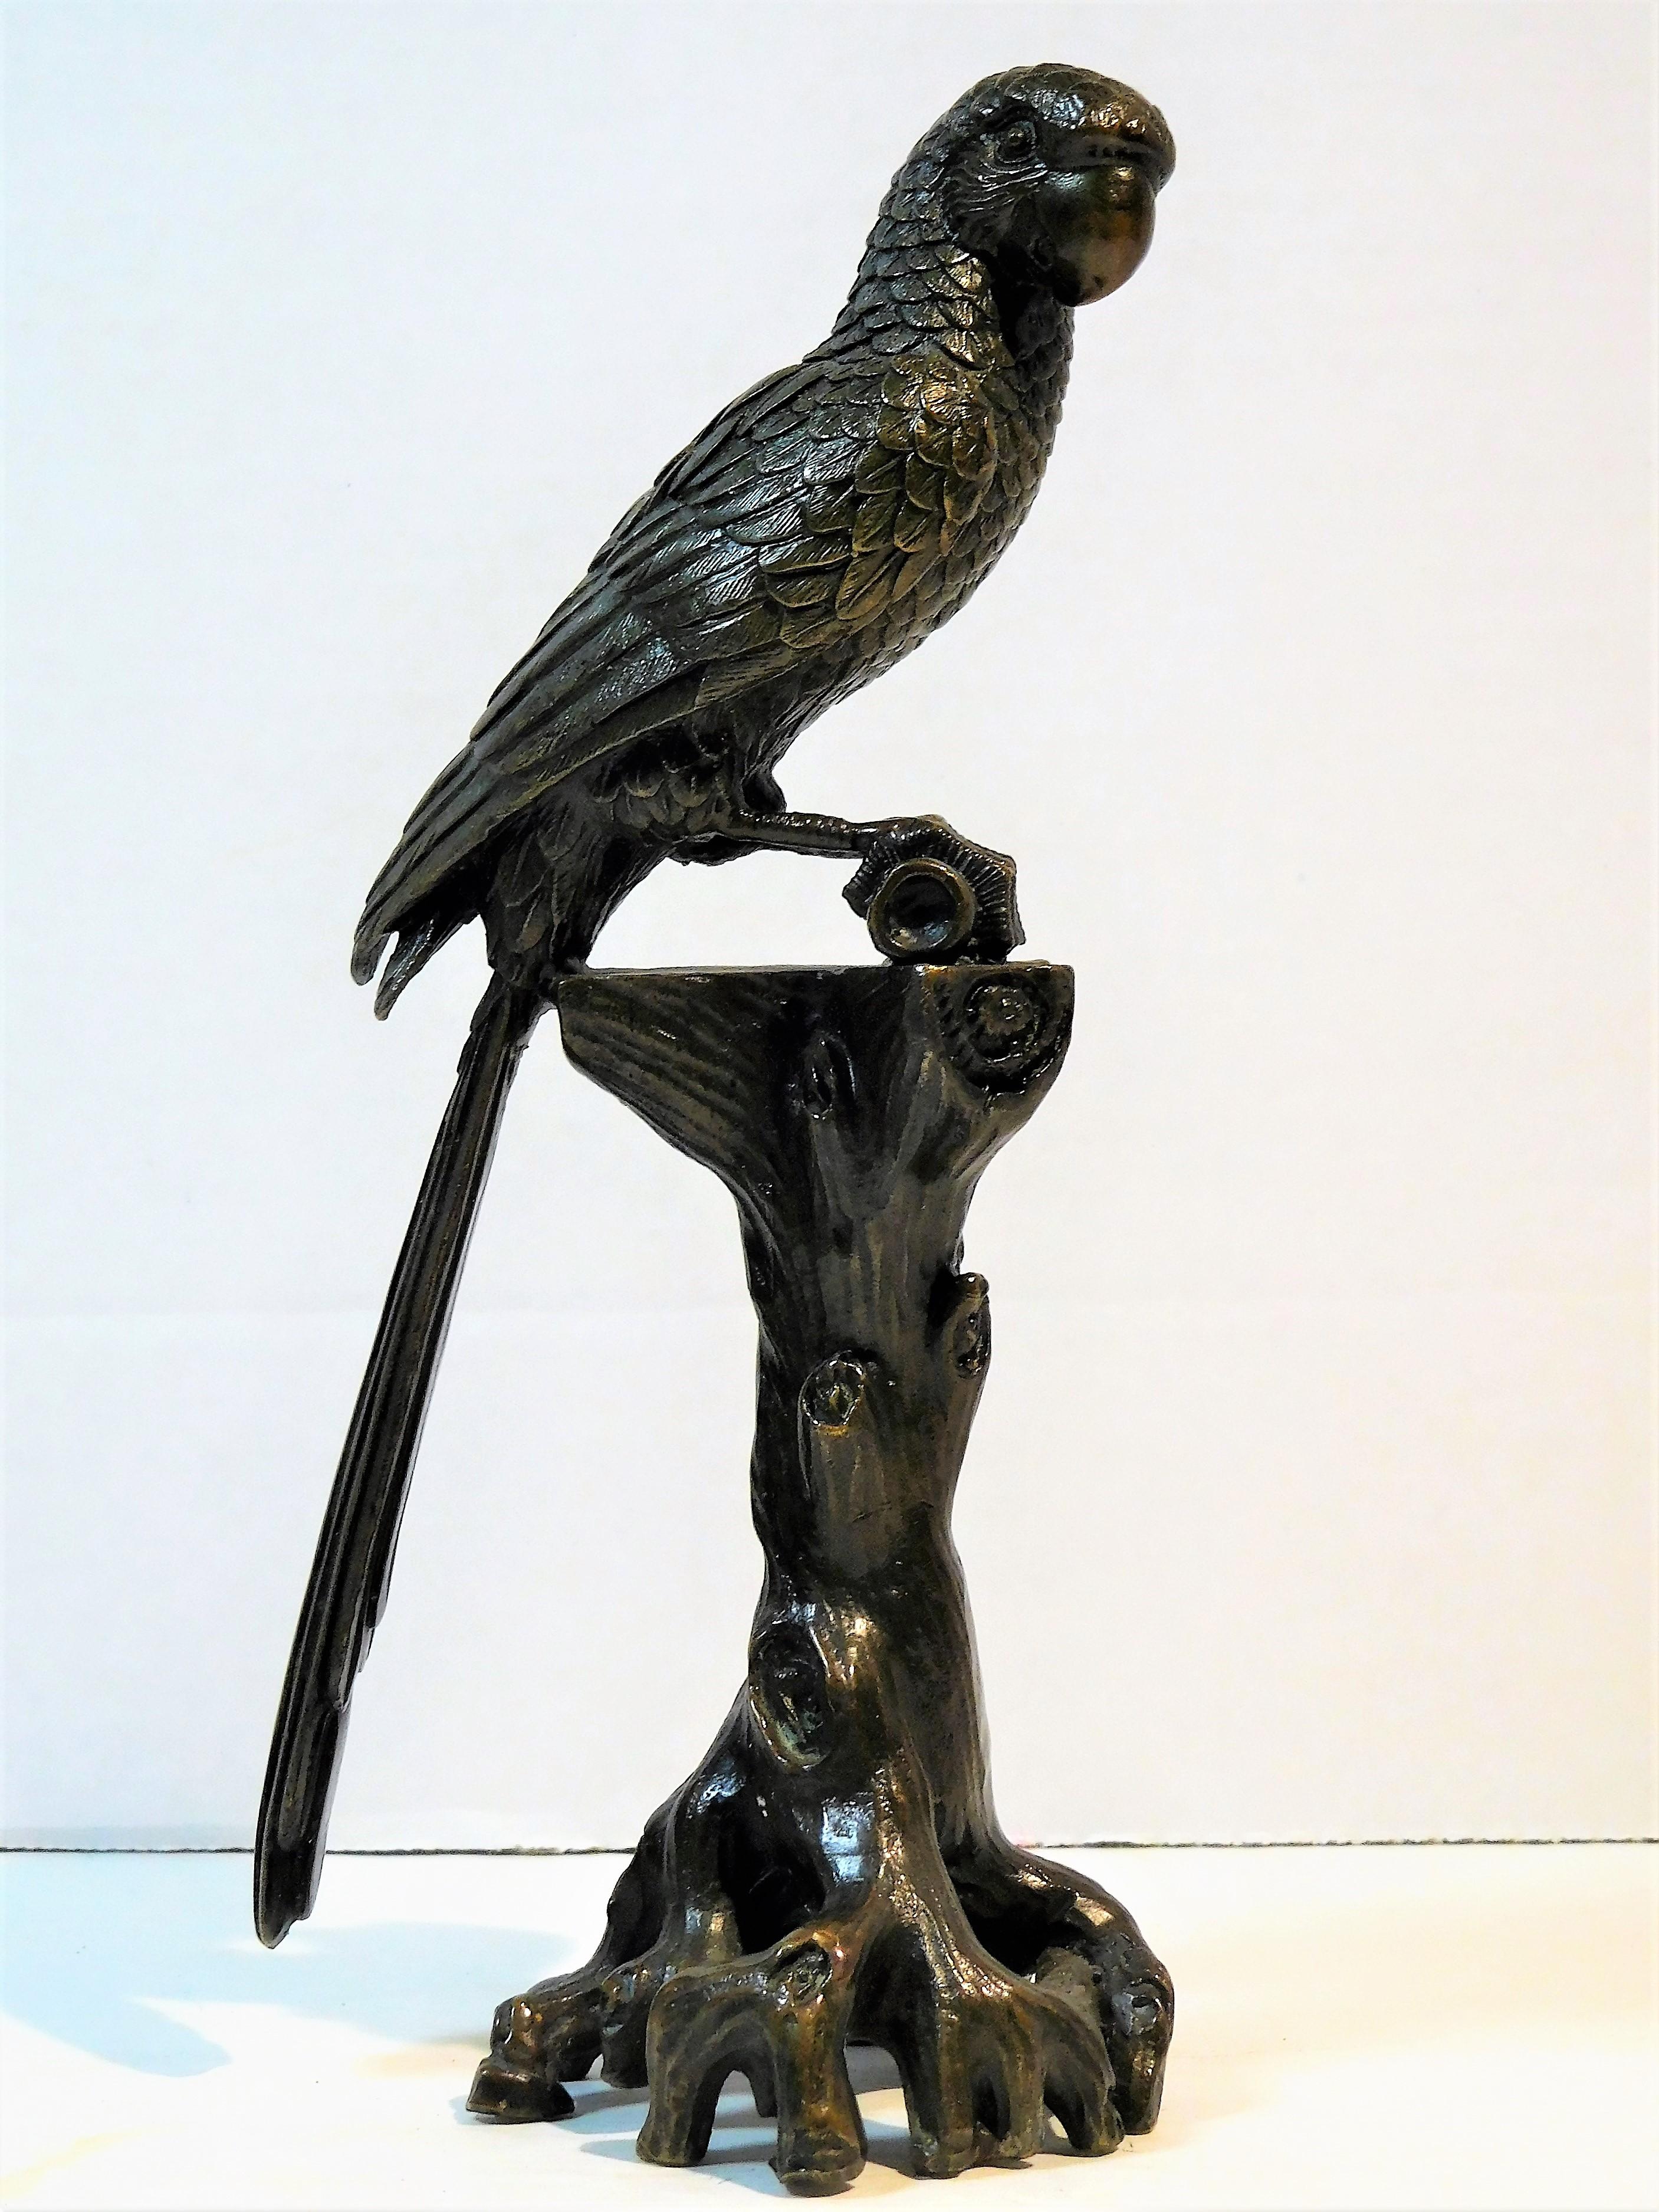 This tabletop figure of a finely cast bronze cockatoo parrot is rich in detail, as seen in the photos. The tree-trunk pedestal with its mass of roots and its realistic bark, adds a sense of the parrot's natural surroundings. The claws of the parrot